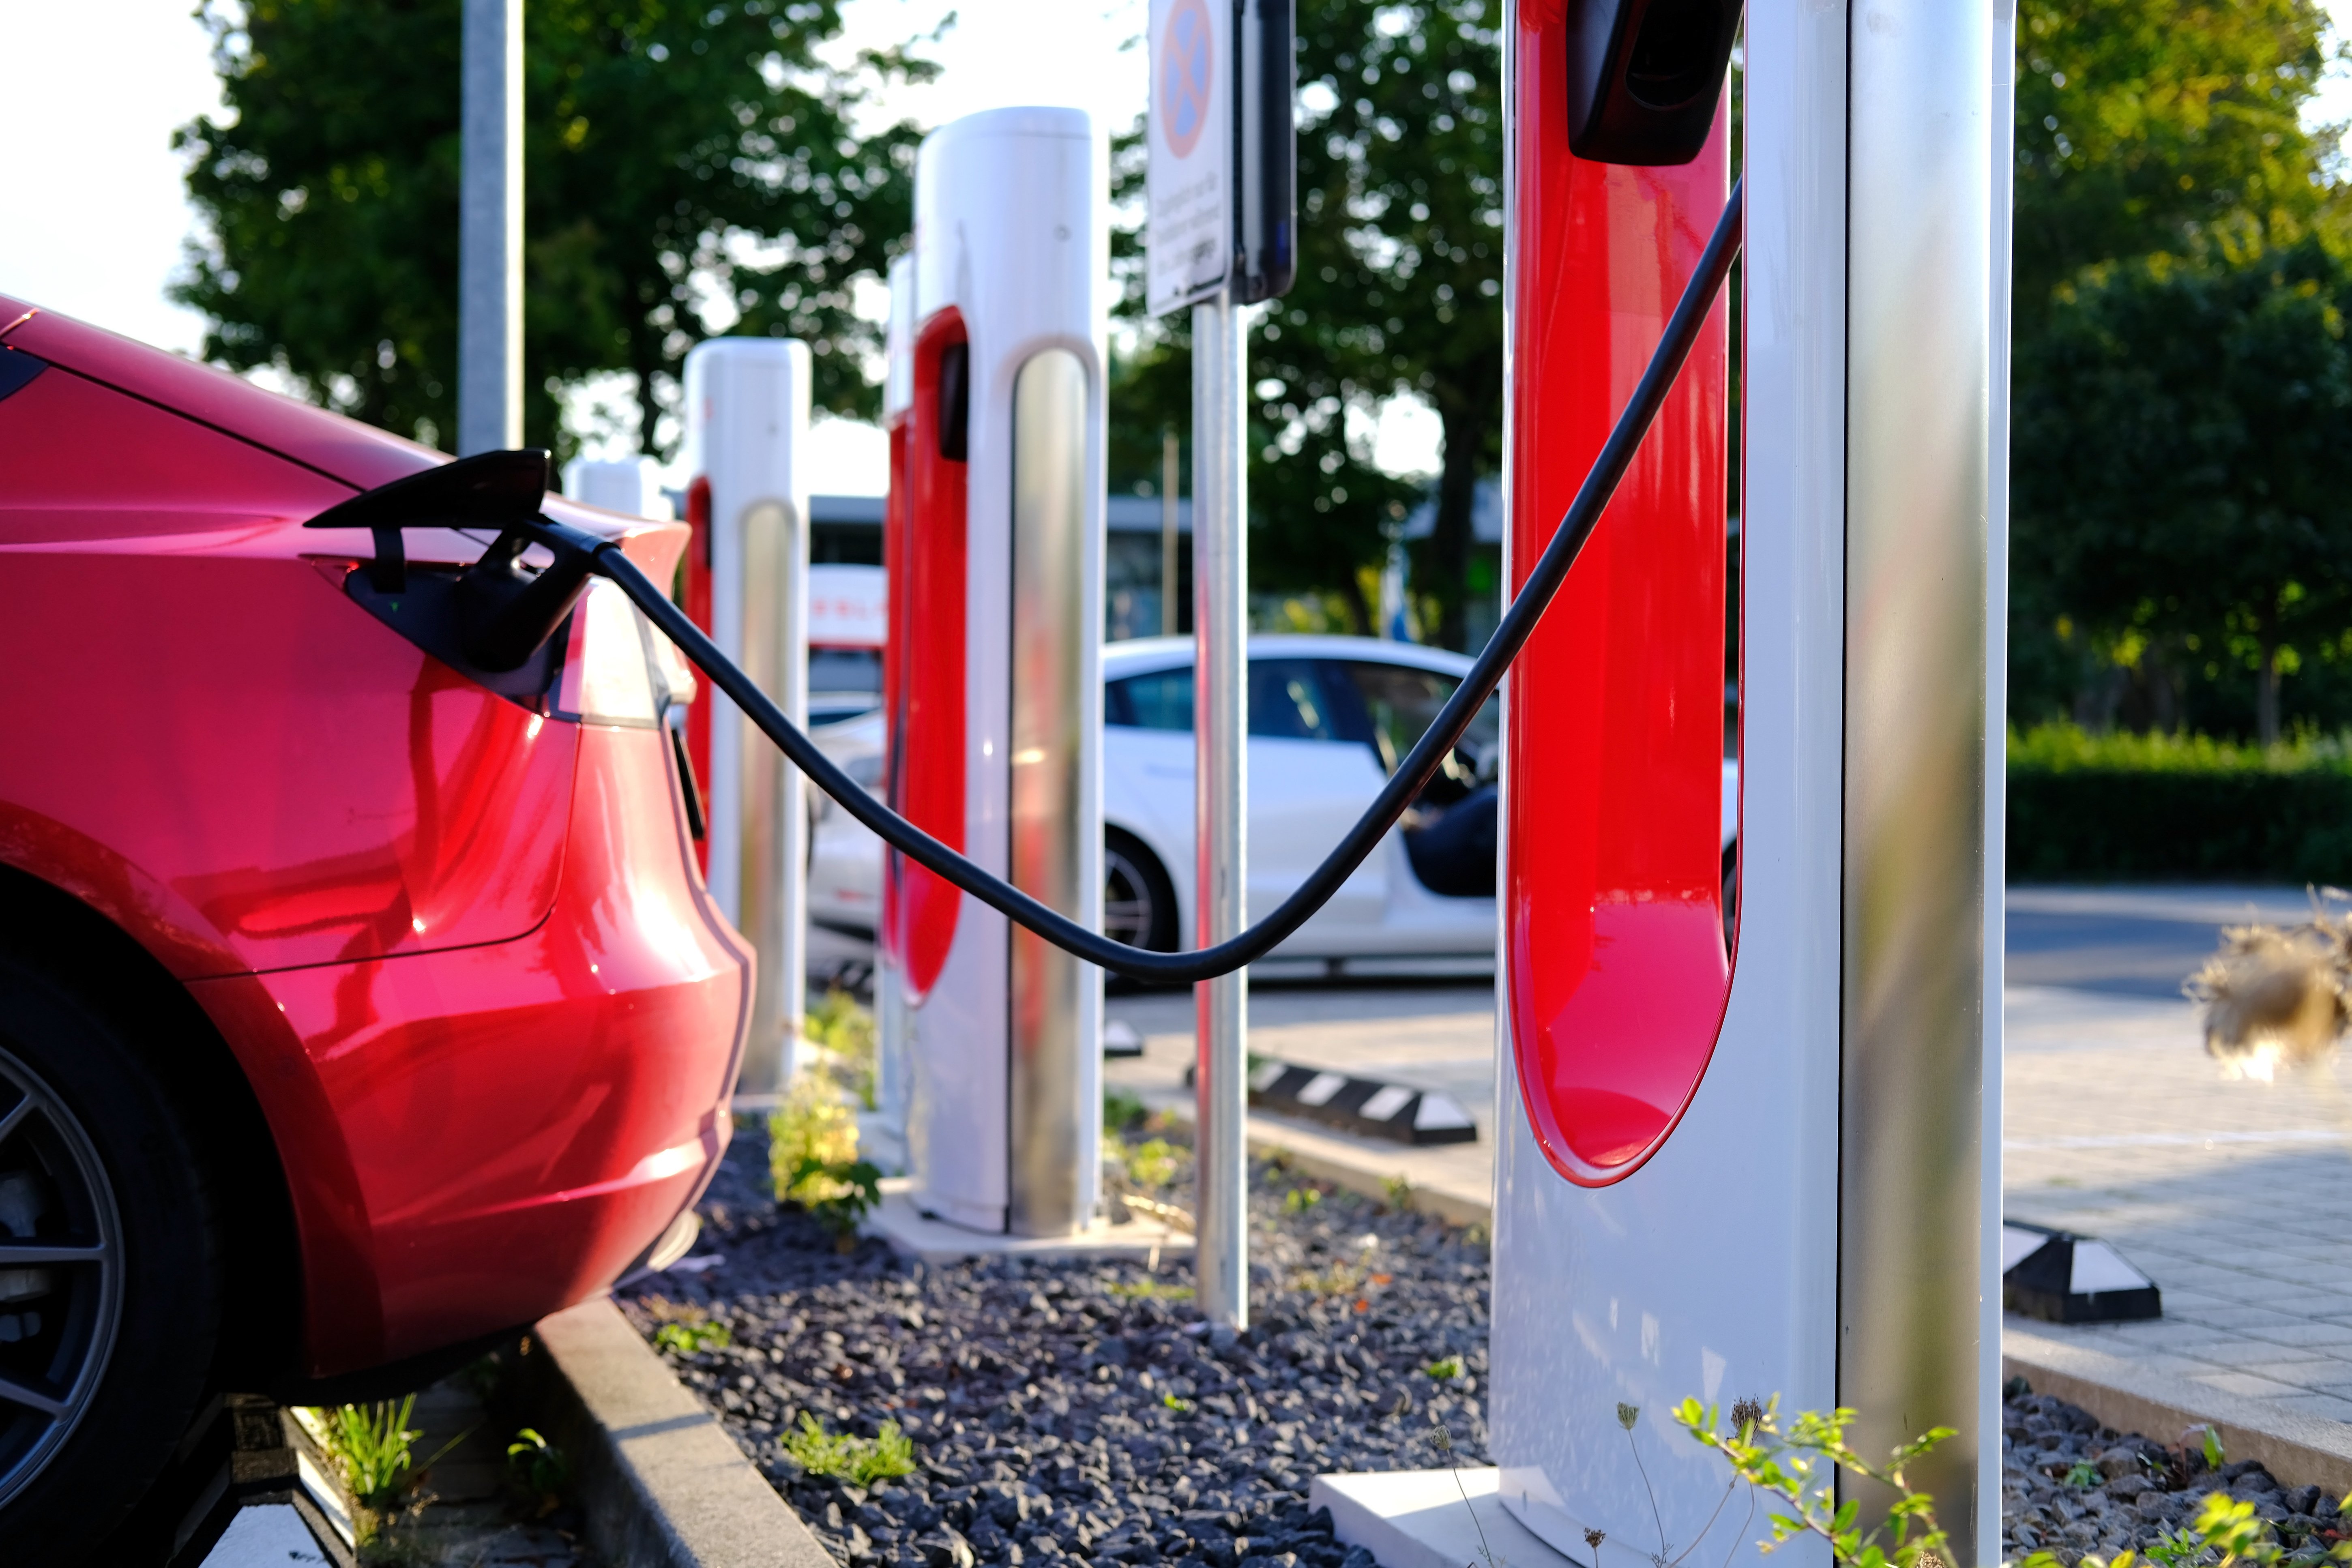 Electric vehicles charging stations